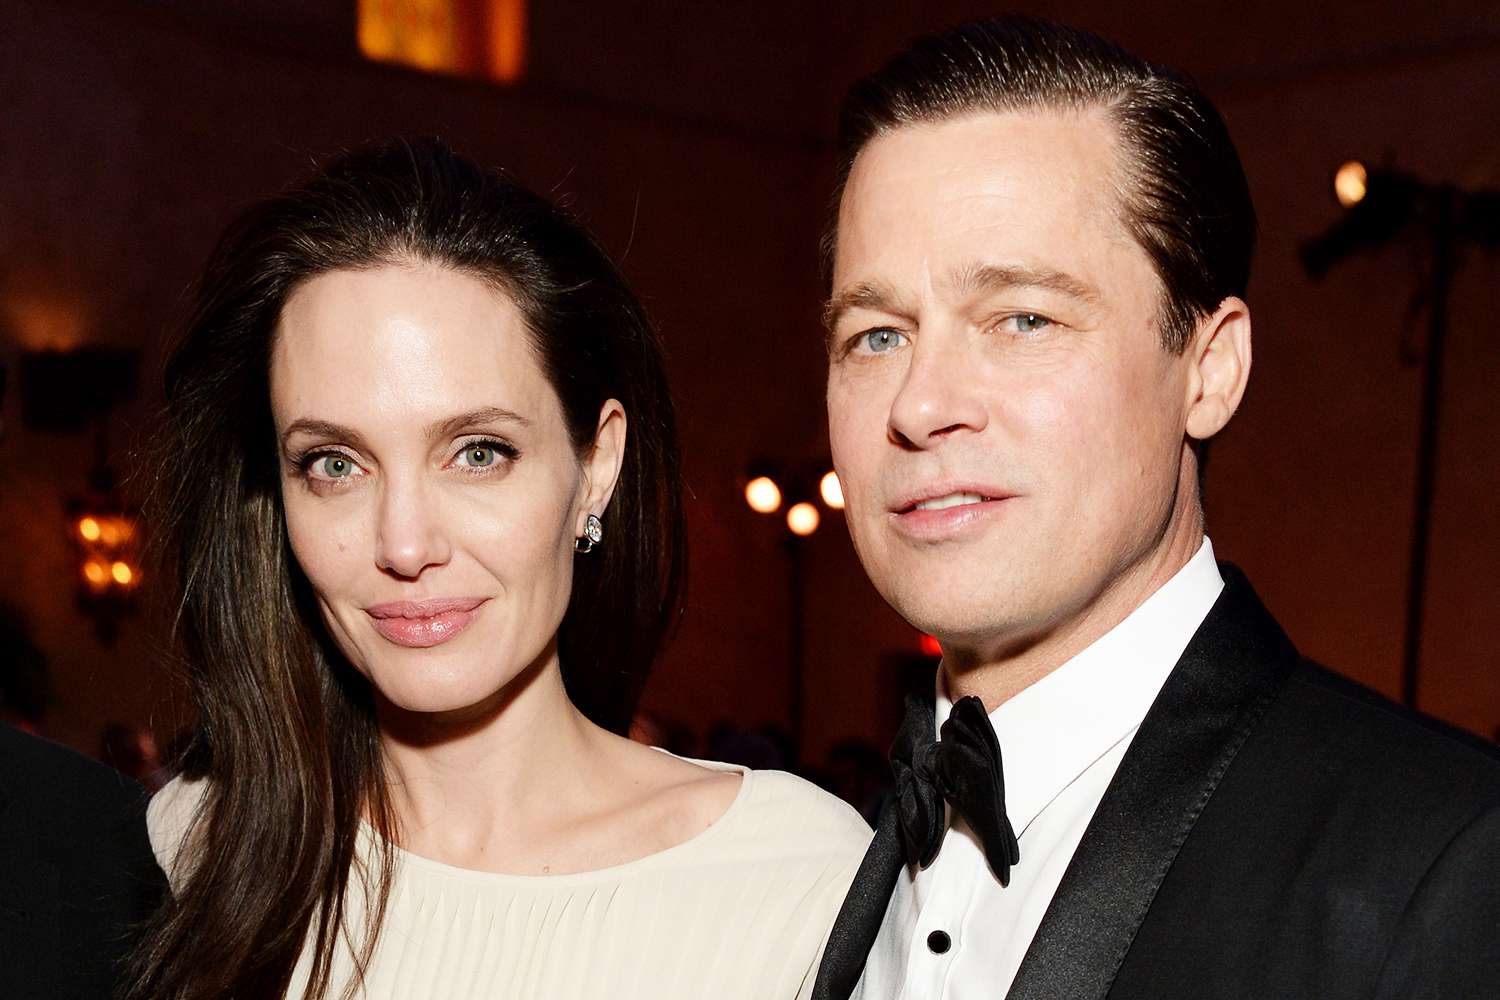 How Brad Pitt and Angelina Jolie Went From Hollywood’s Hottest Romance to a Divorce That’s Dragged on for 8 Years